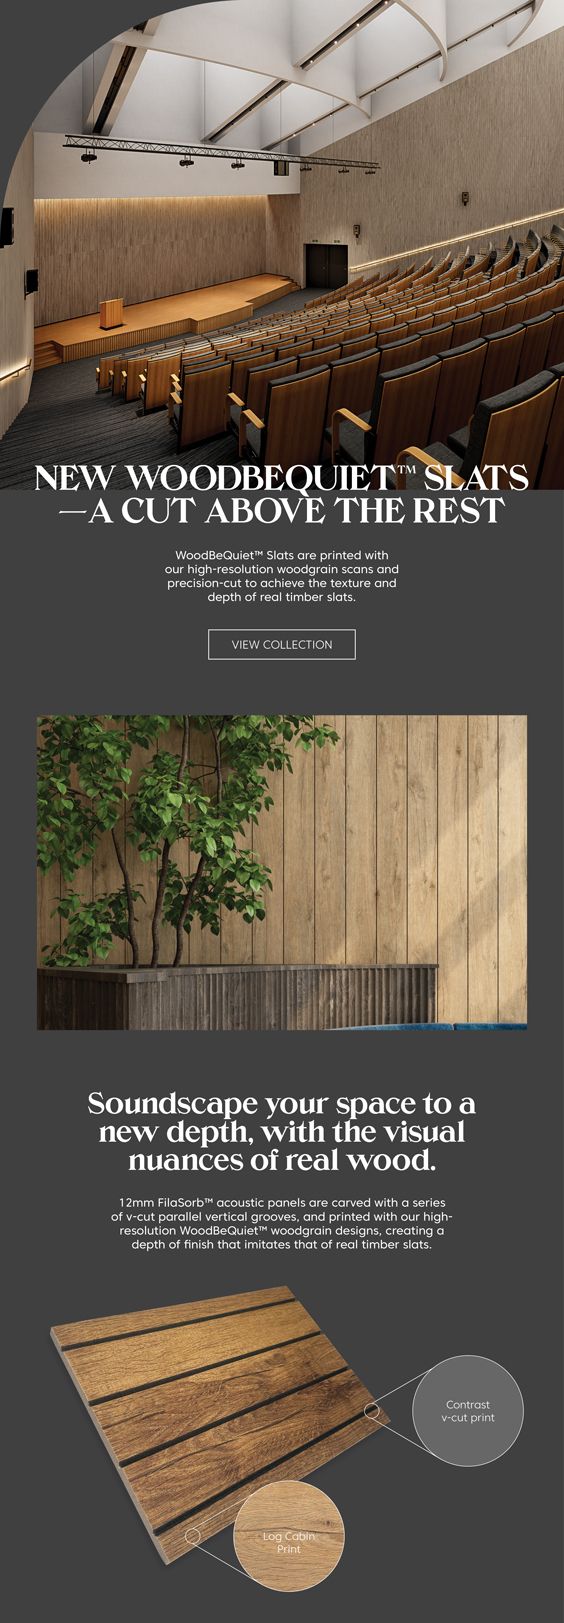 Cut above the rest with NEW WoodBeQuiet™ Slats